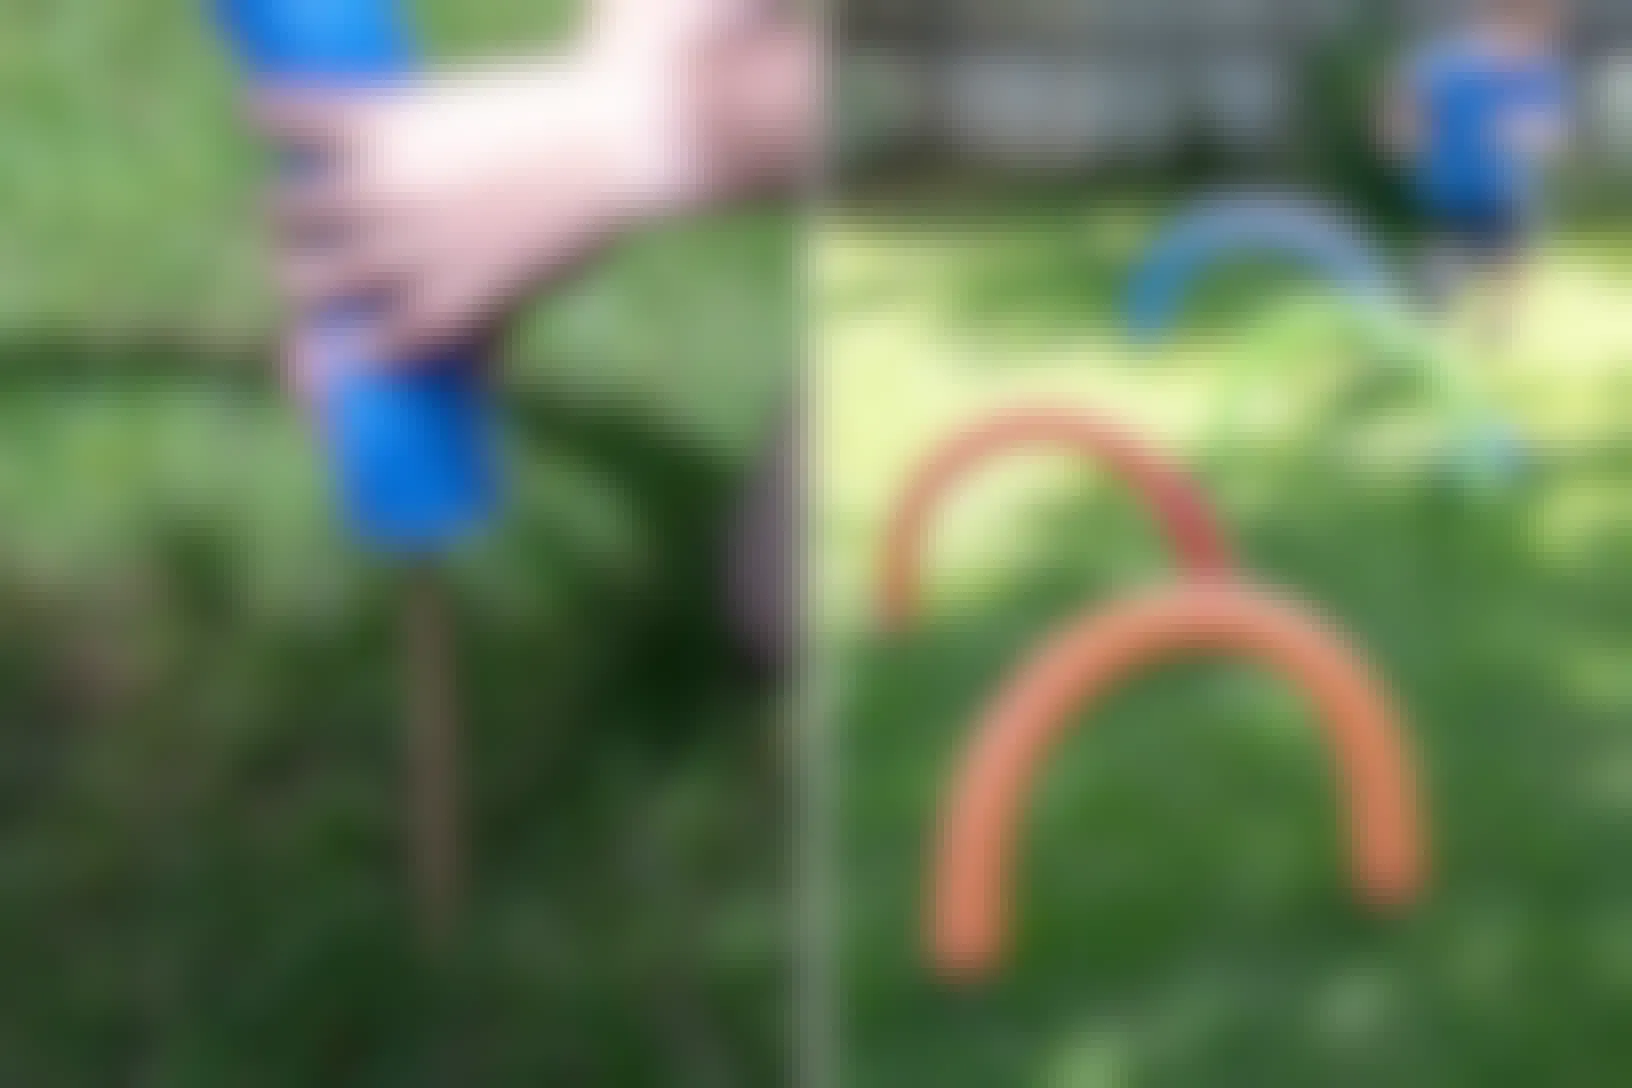 A person's hands placing a pool noodle onto a dowel sticking out of the ground, and a child kicking a ball through DIY pool noodle obstacles on a lawn.